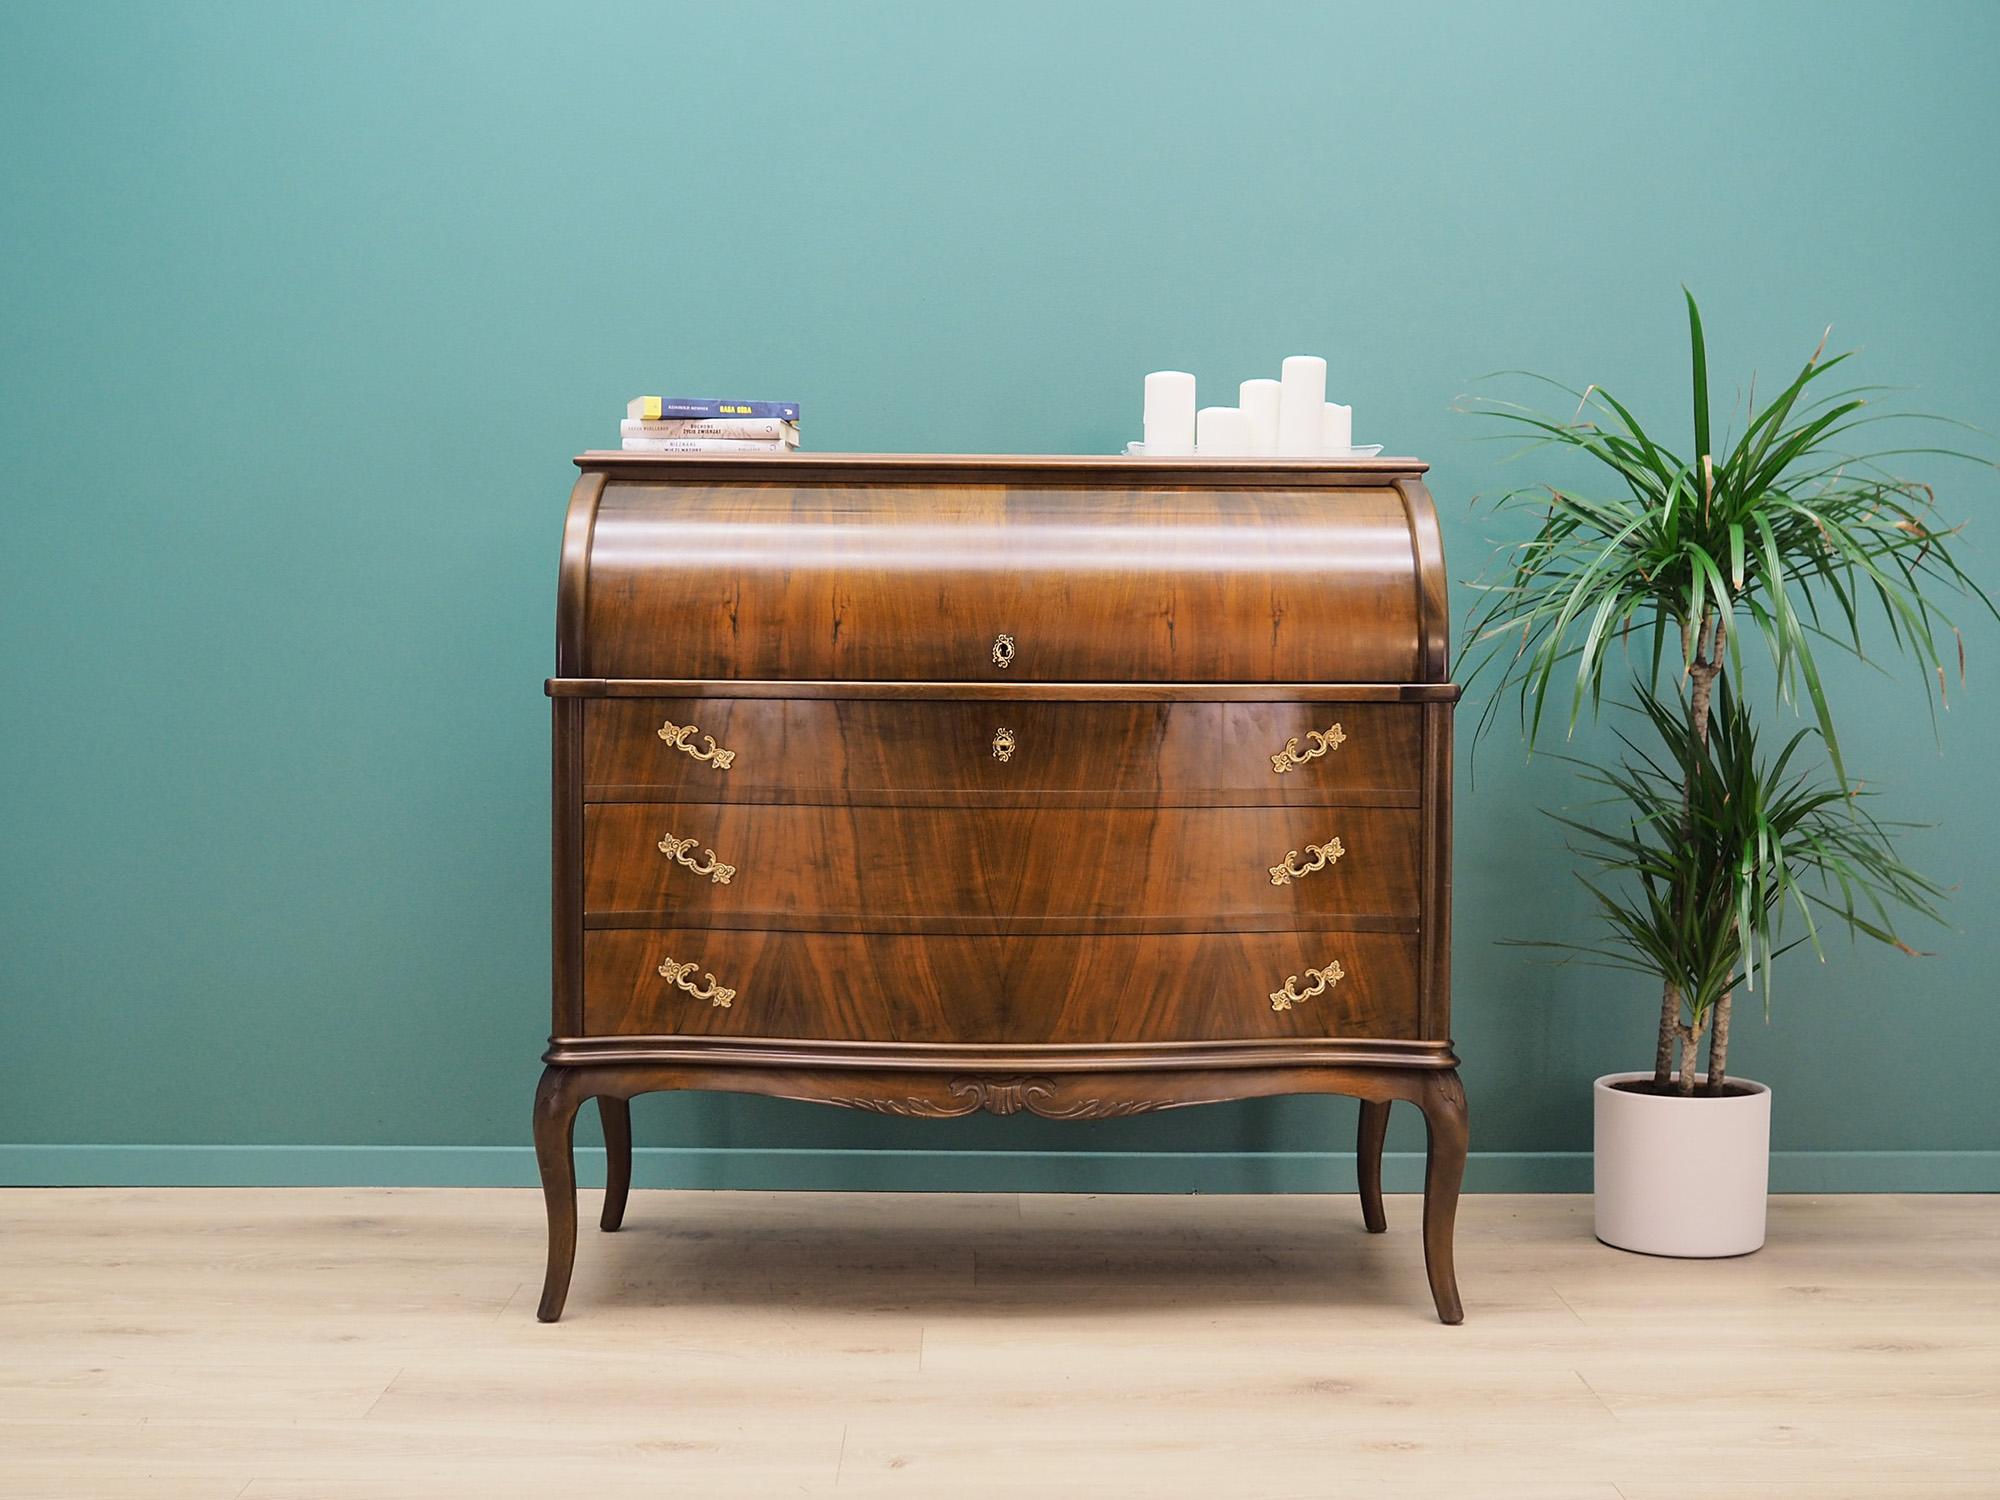 Superb secretary from the 60 / 70's. Danish design, minimalist form. Furniture is covered with walnut veneer, legs made of solid walnut wood. Secretary has three capacious drawers in the lower part and a pull-out bar and four drawers in the upper